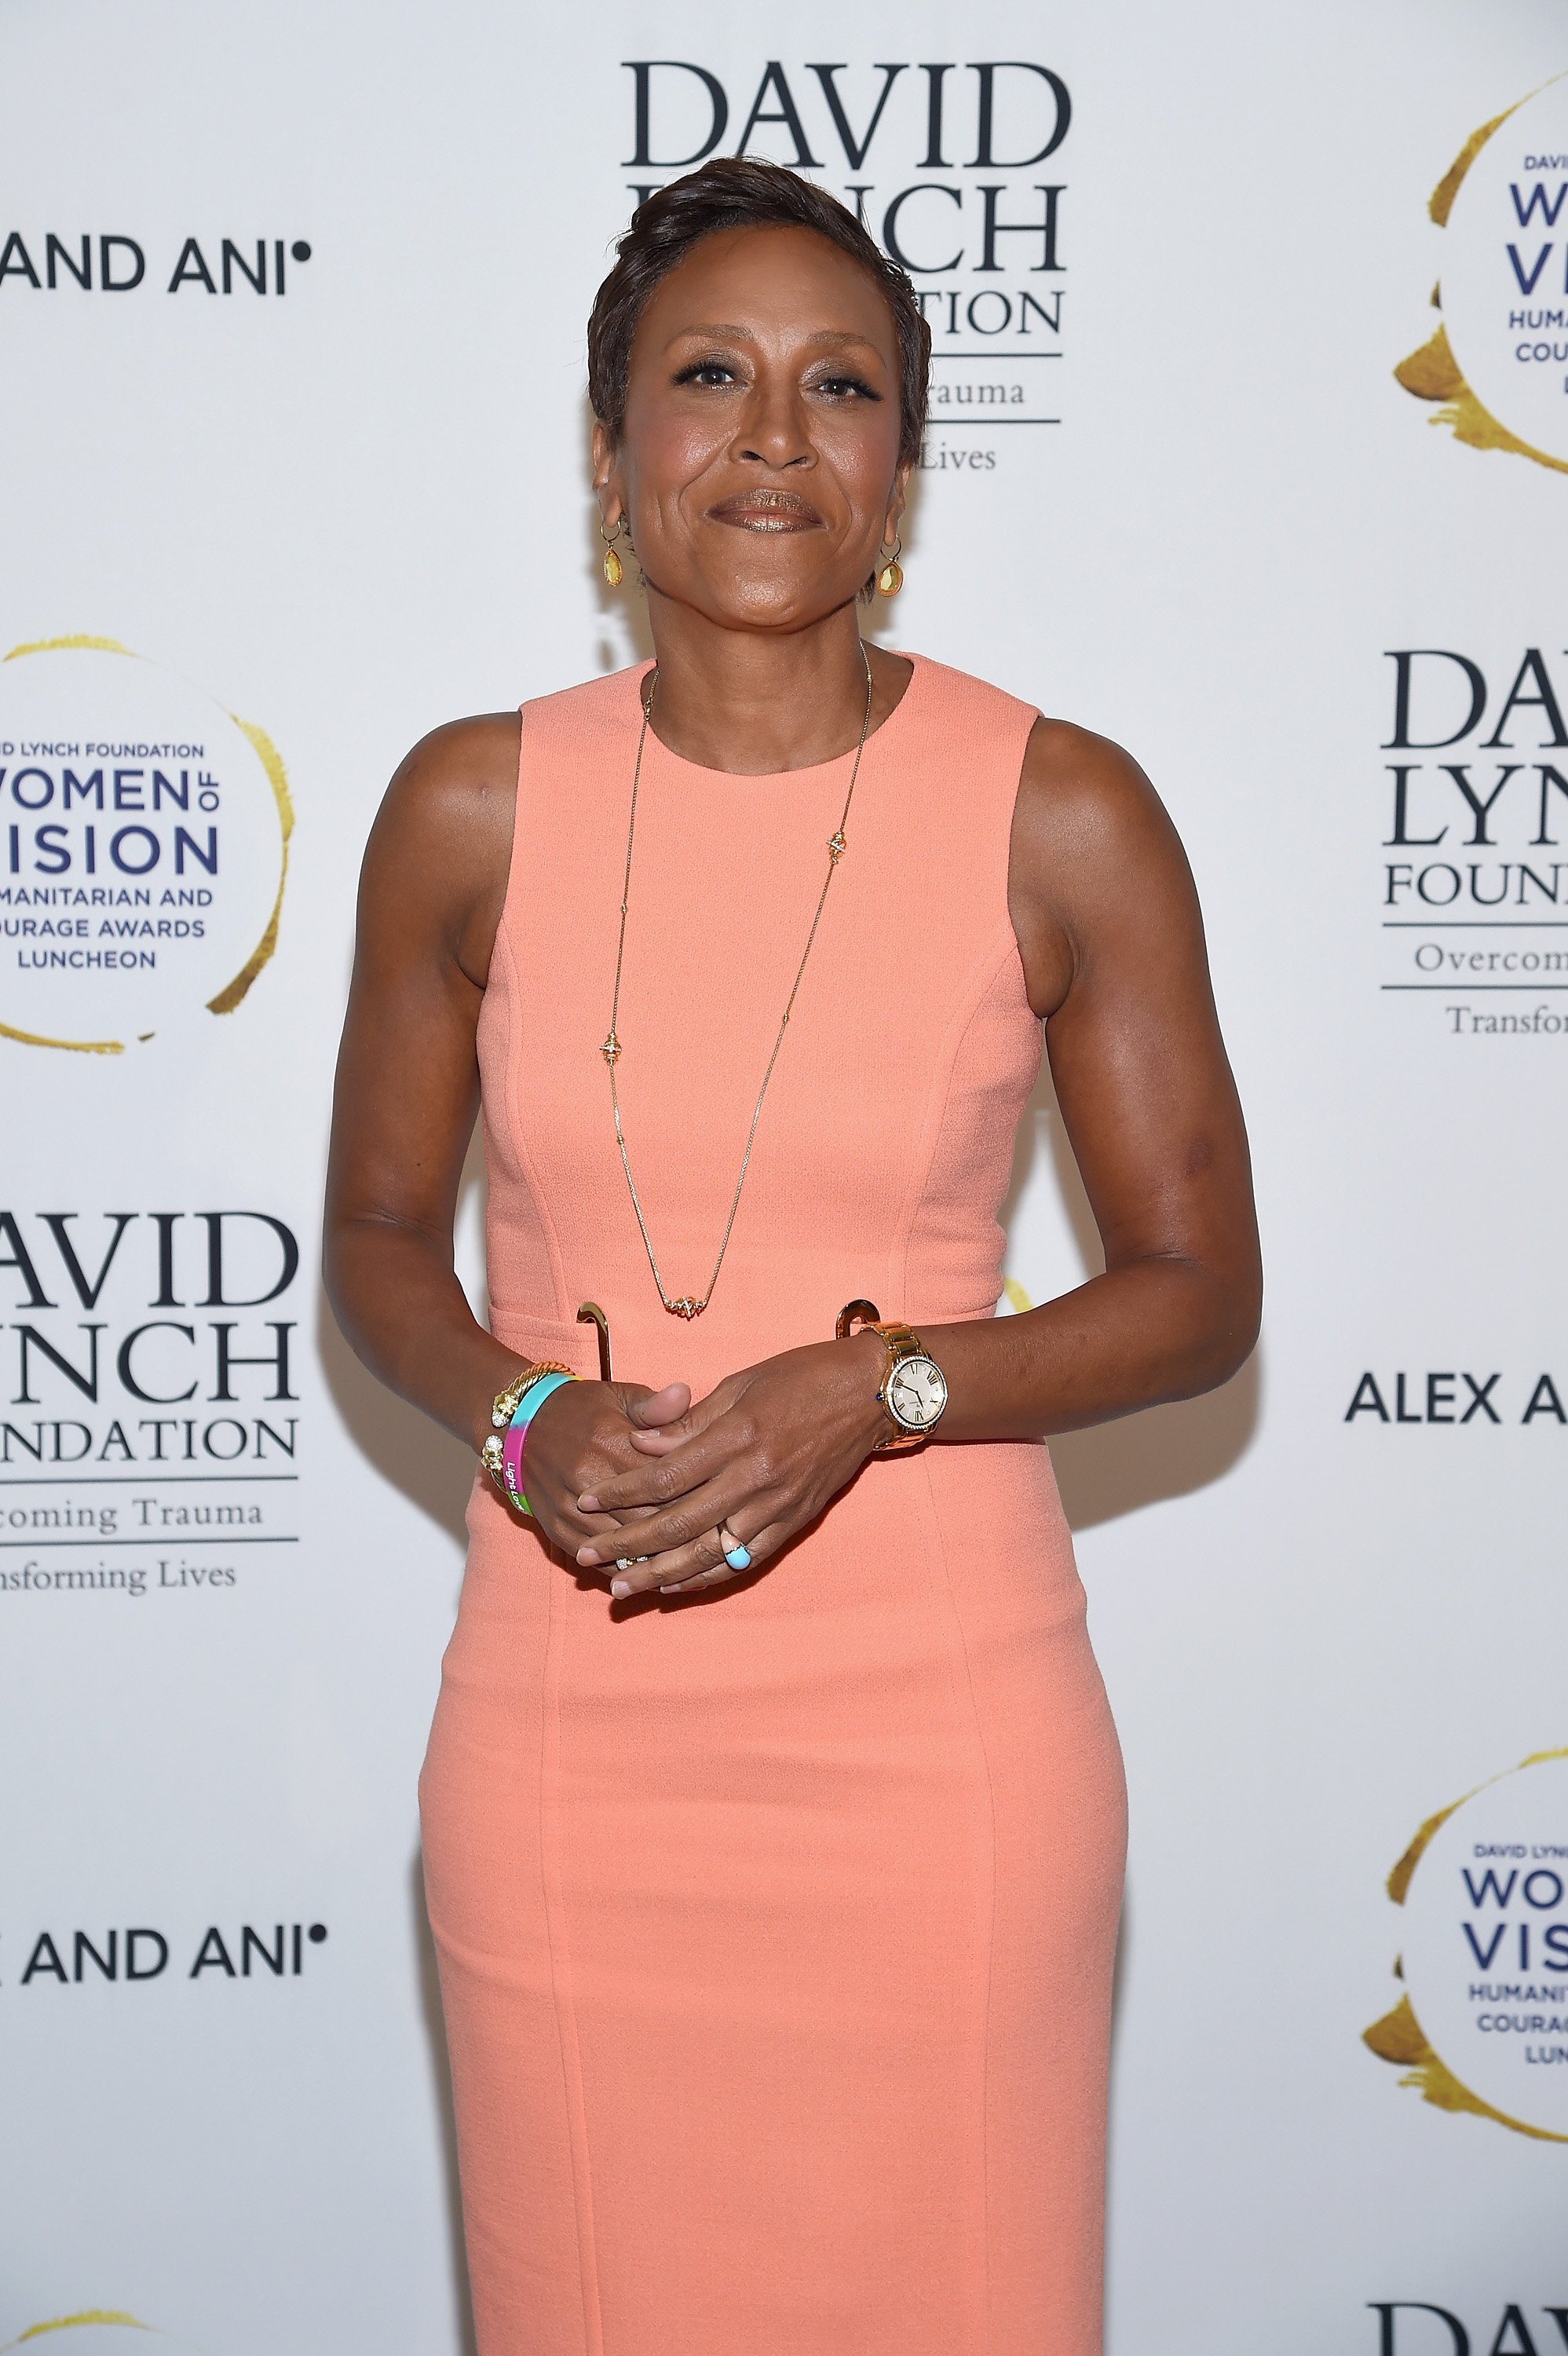 Robin Roberts at the David Lynch Foundation's "Women of Vision Awards" in May 2017. | Photo: Getty Images